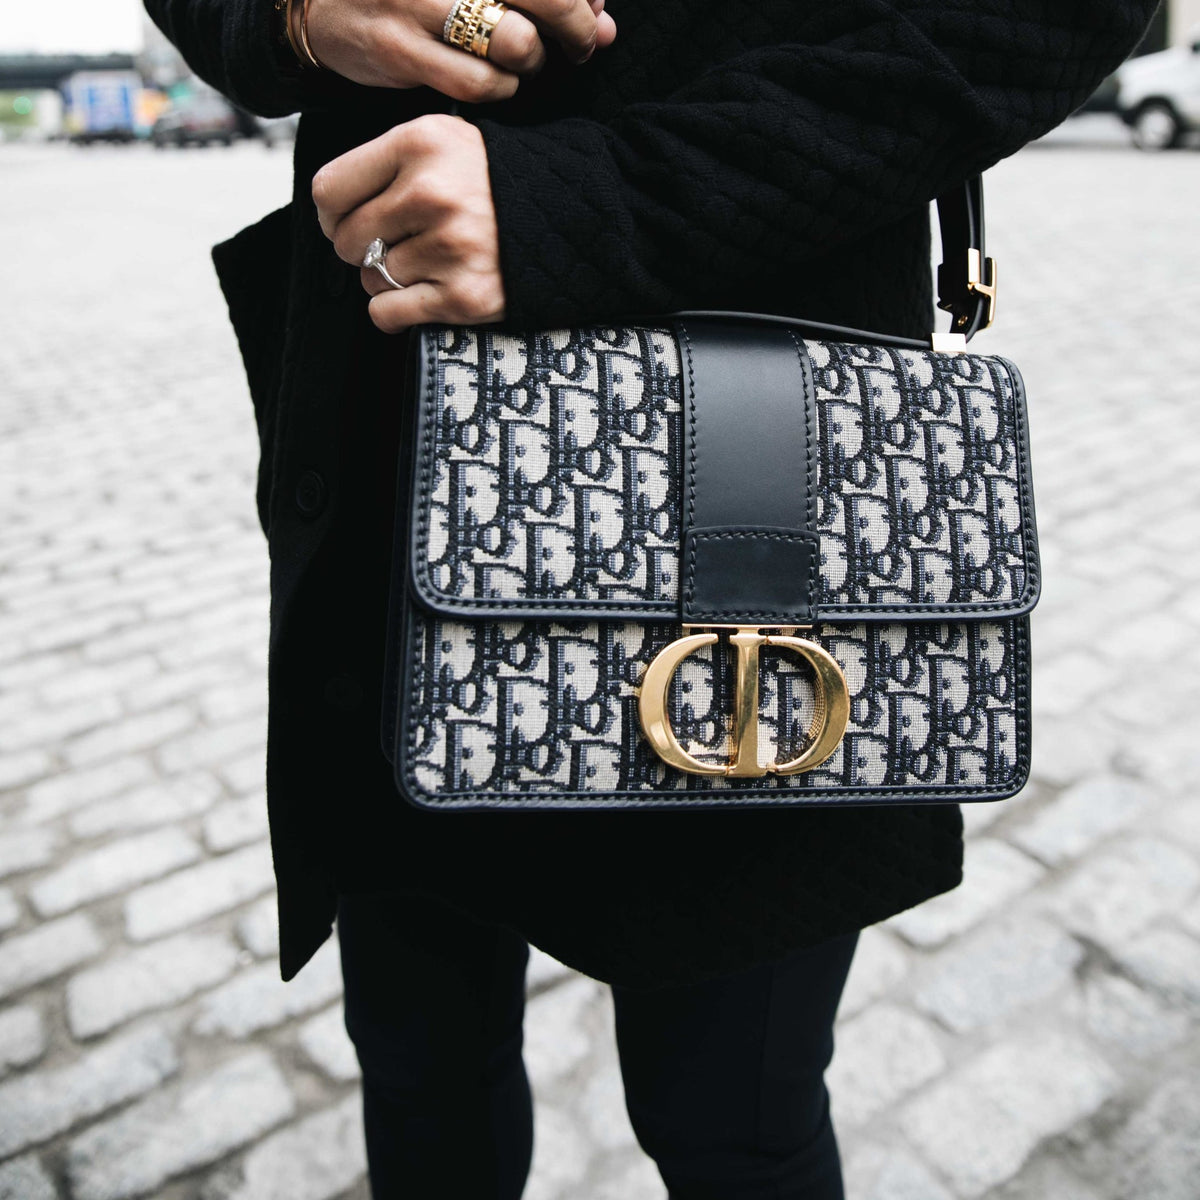 Dior's iconic 30 Montaigne Bag gets an elevated update - Buro 24/7